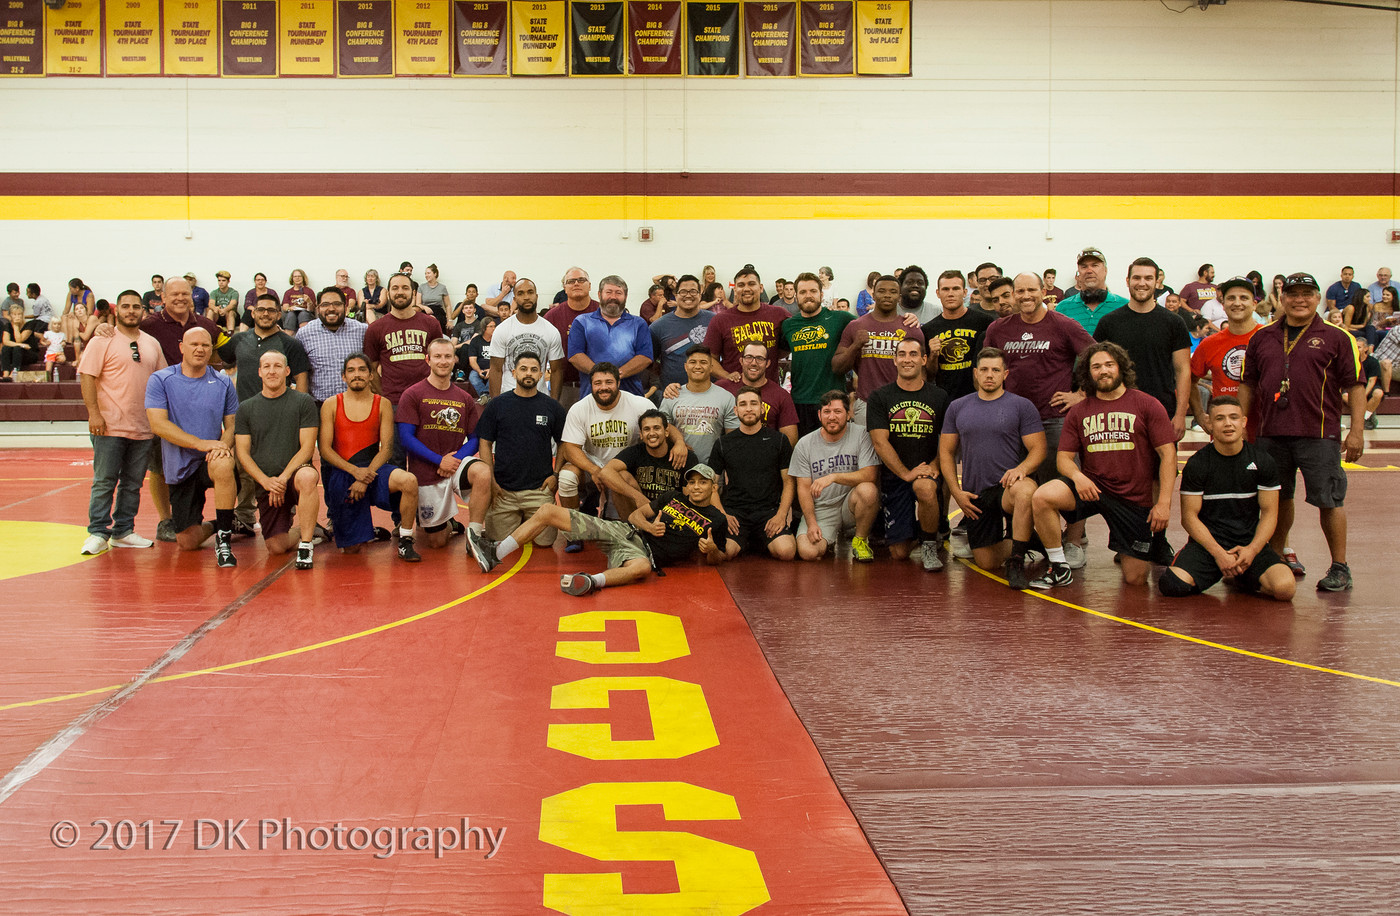 Wrestling hosts their Annual Alumni Match (scrimmage) to prepare for the upcoming season